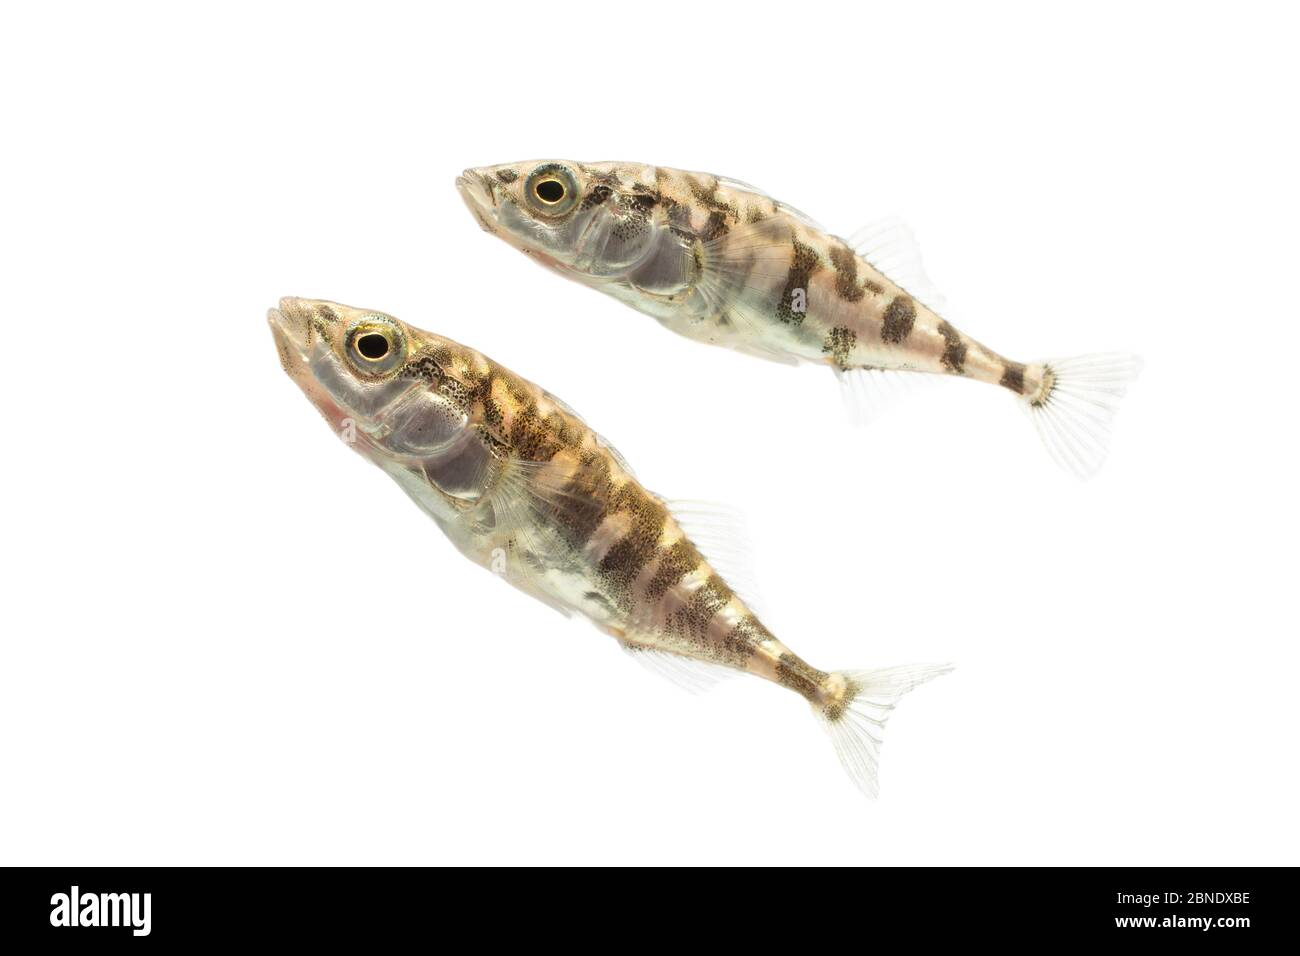 Three-spined stickleback (Gasterosteus aculeatus) two adults with 'leiurus form'. The Netherlands, October, Meetyourneighbours.net project Stock Photo